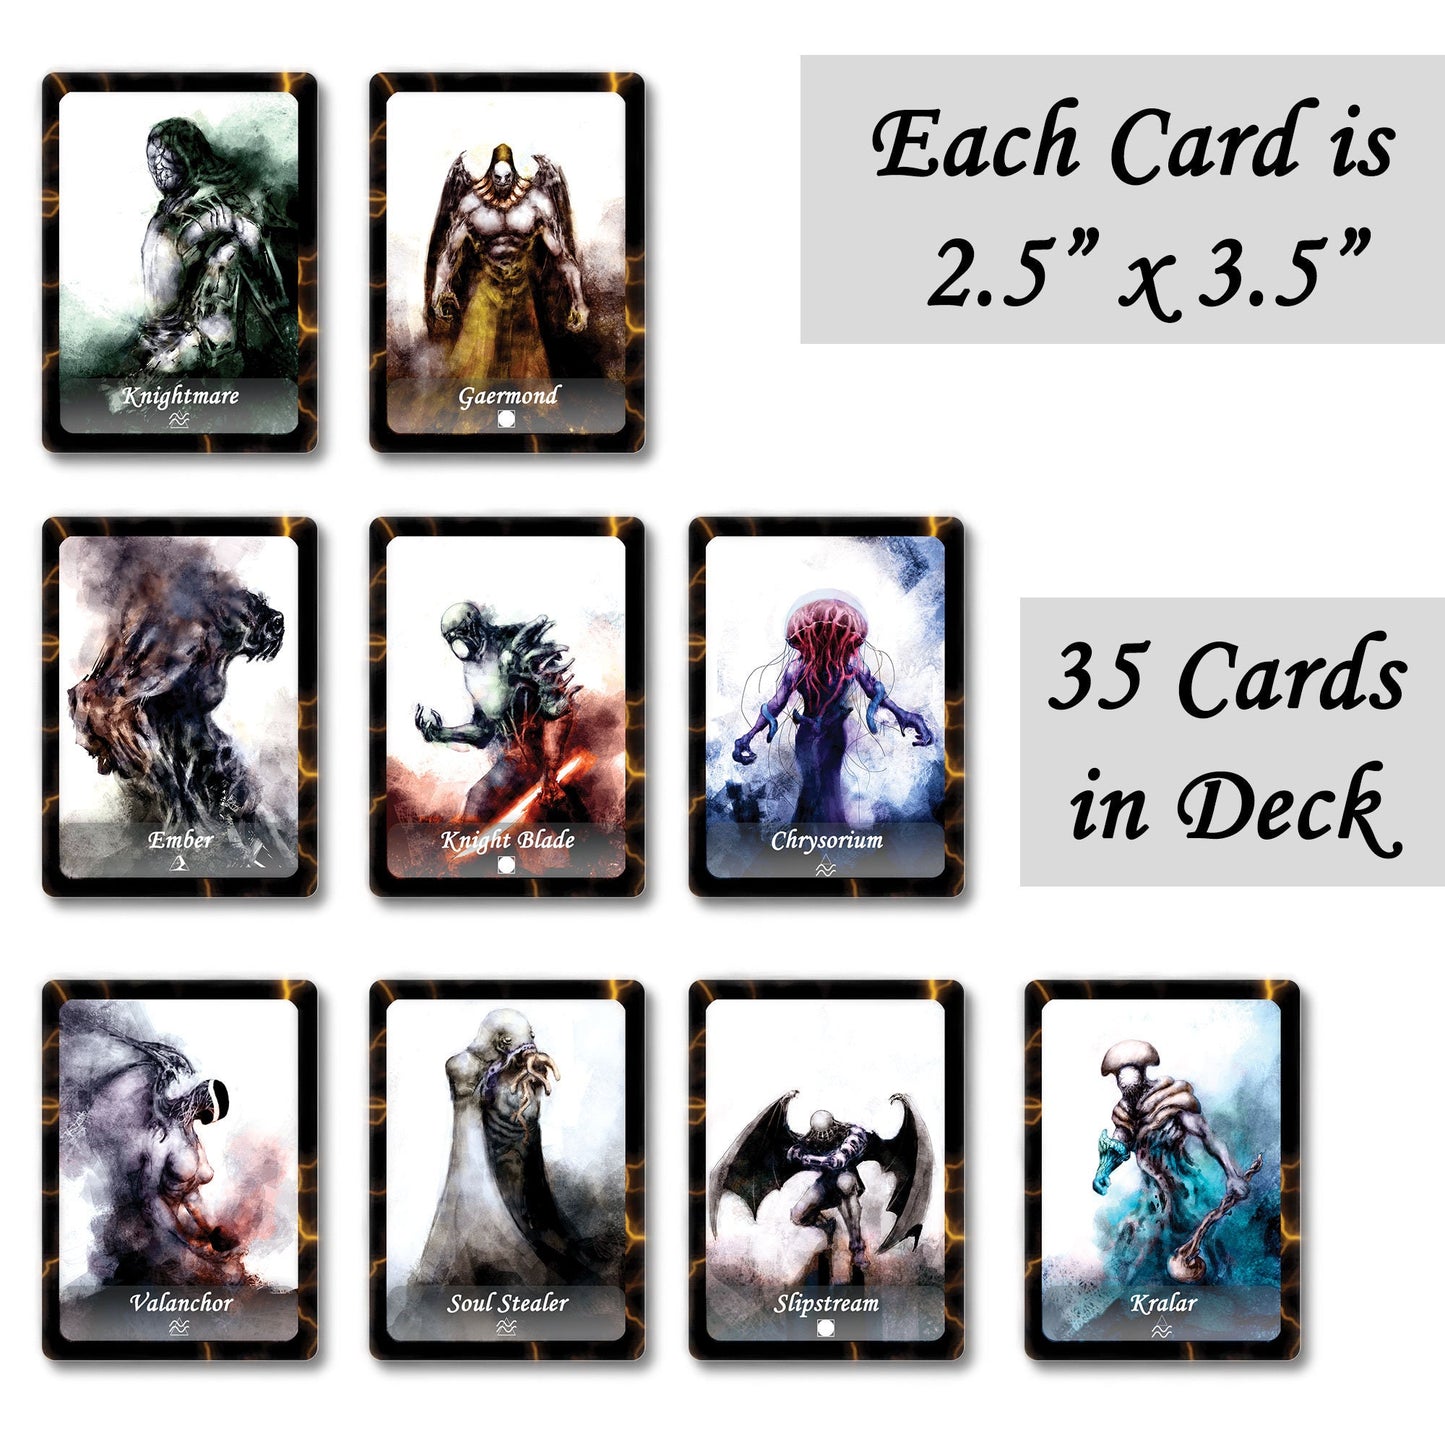 Kalan Deck of 35 Monster Cards with Downloadable PDF used in DnD and Writing